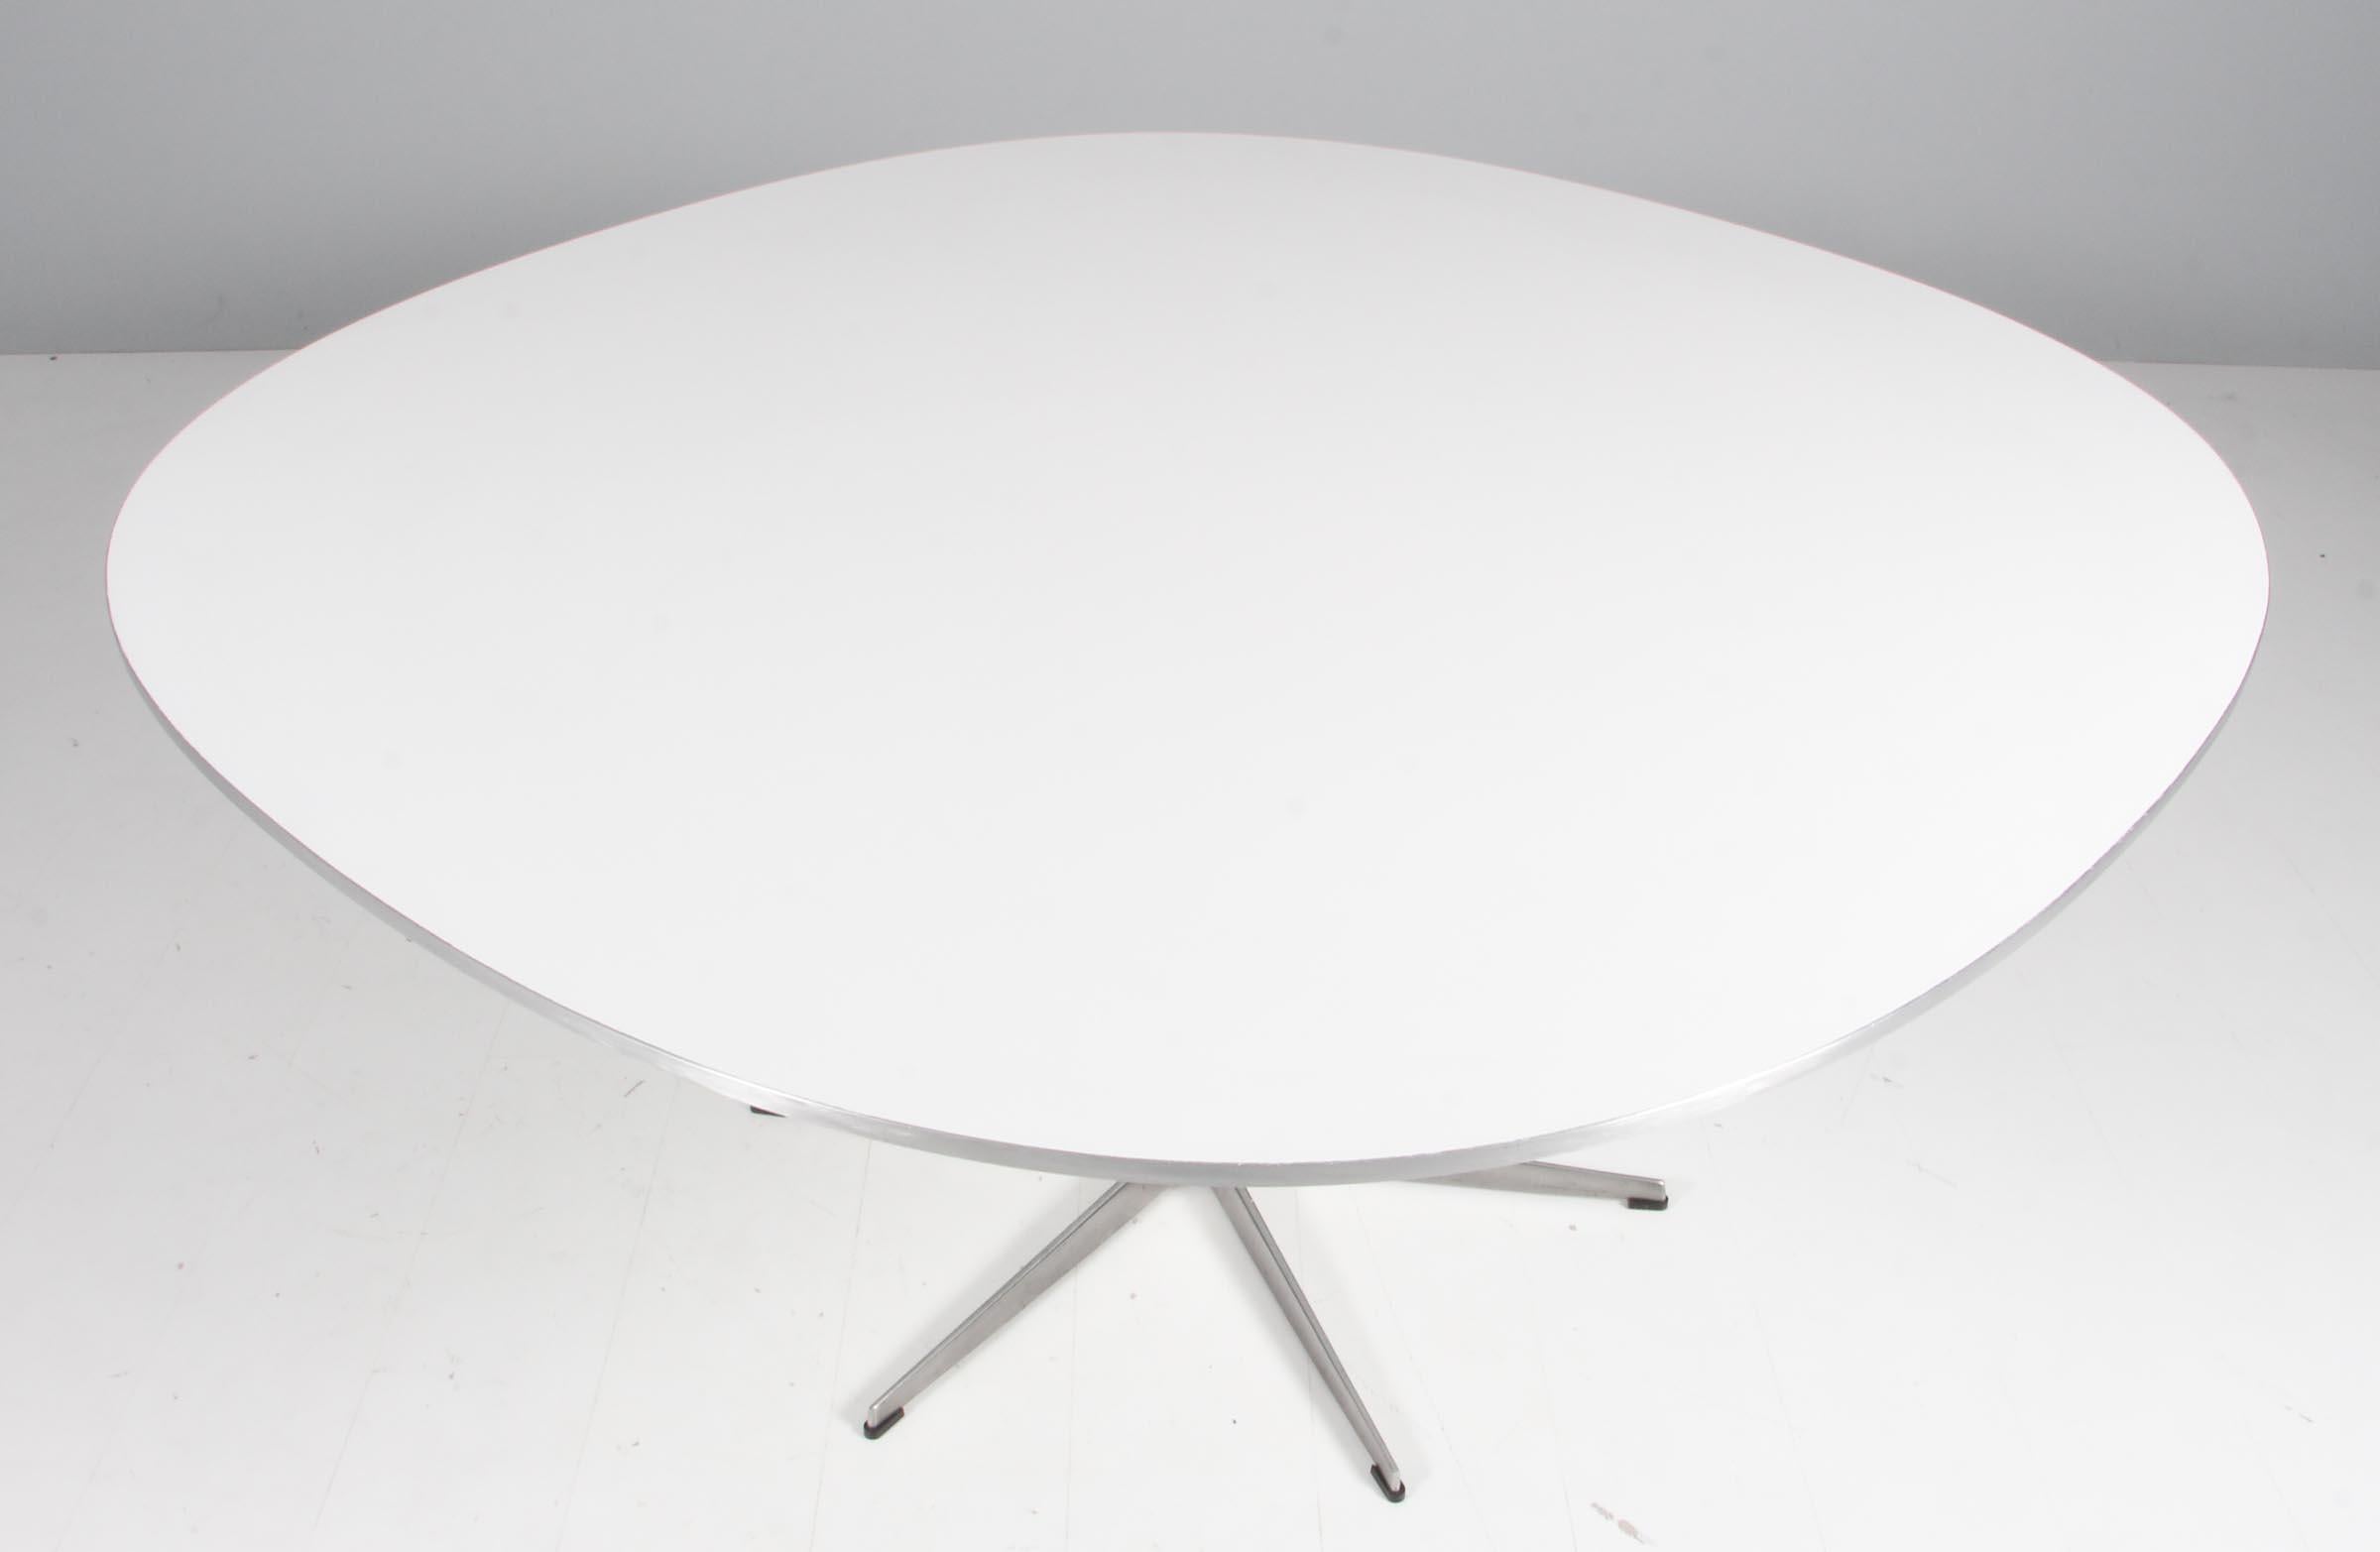 Piet Hein & Arne Jacobsen dining table with new laquered white top.

six star base of aluminium and steel.

Made by Fritz Hansen.